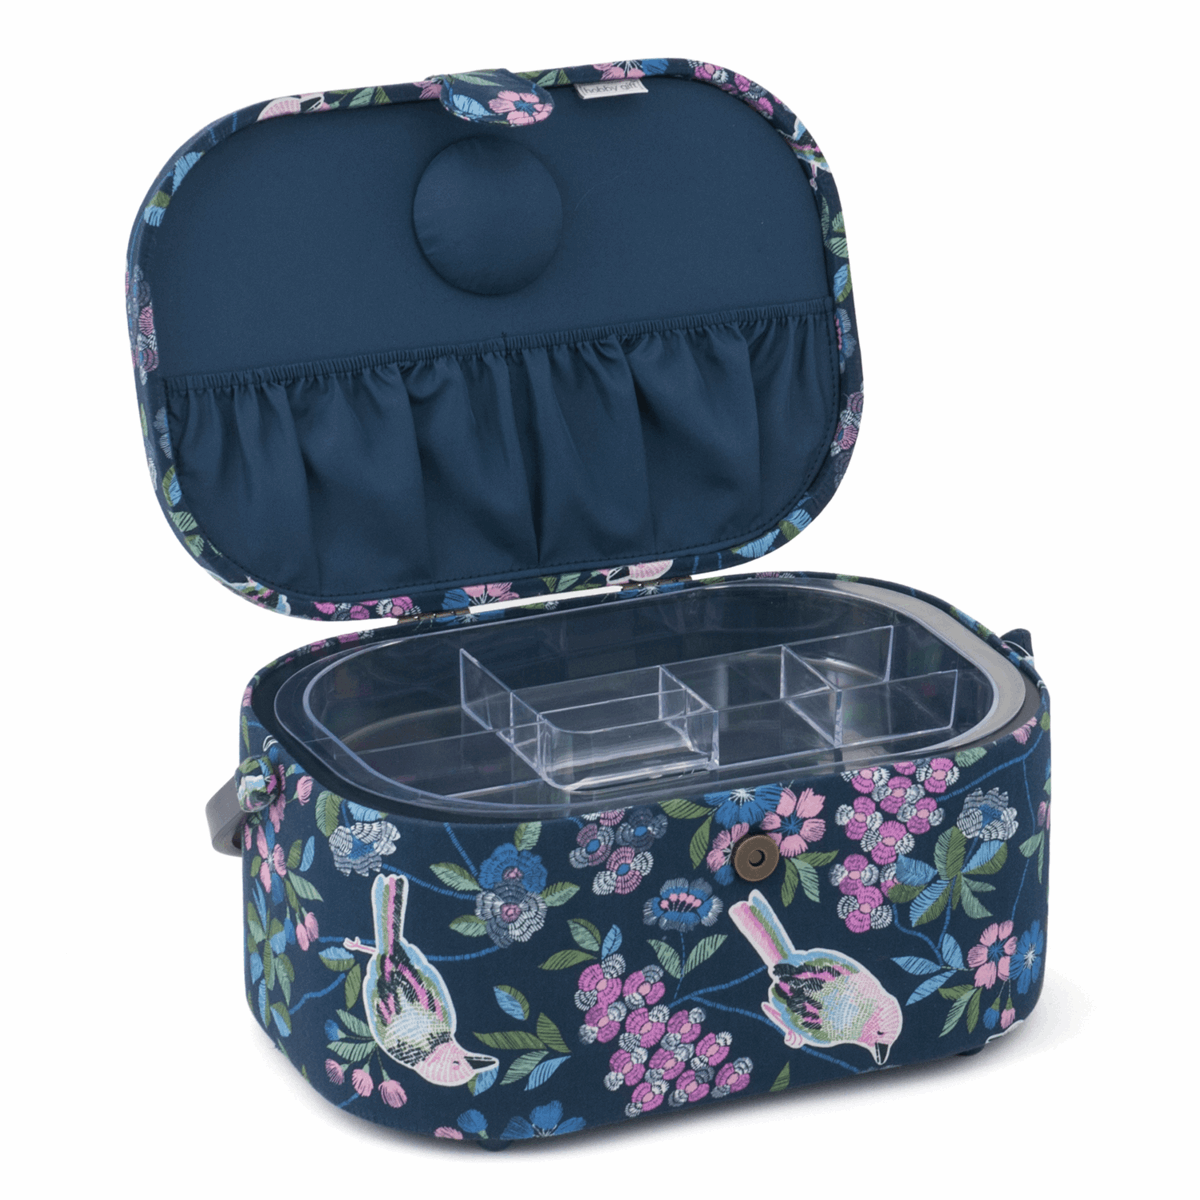 Floral Birds Sewing Box - Large Oval